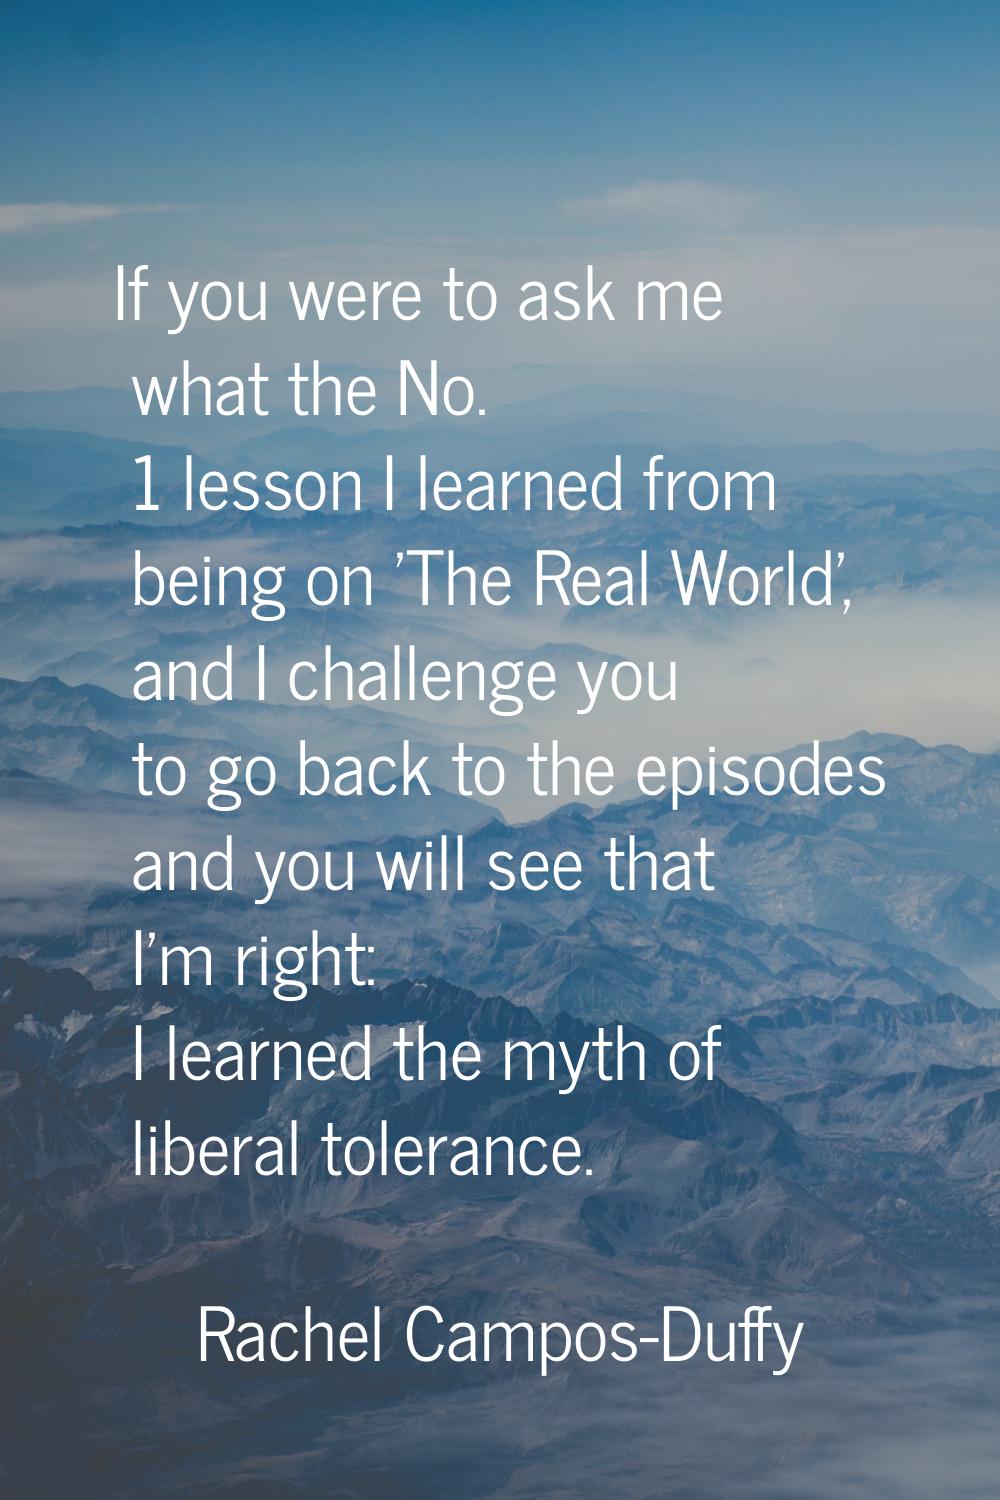 If you were to ask me what the No. 1 lesson I learned from being on 'The Real World', and I challen